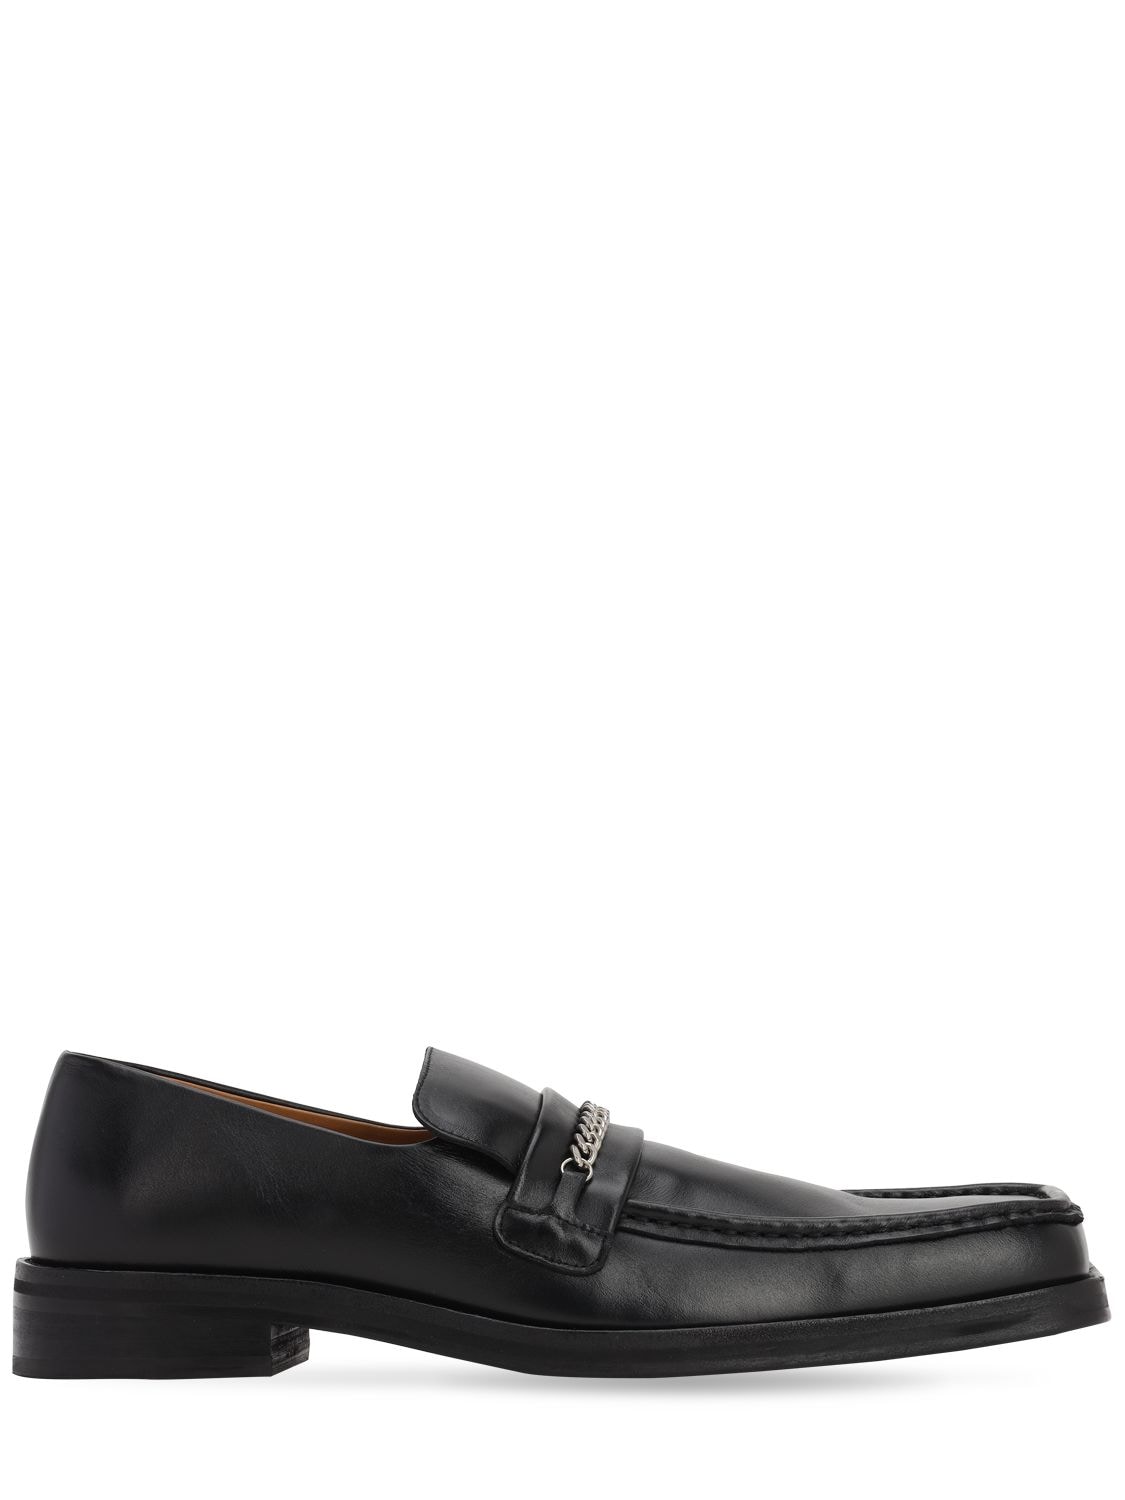 Martine Rose 35mm  Leather Loafers W/ Square Toe In Black